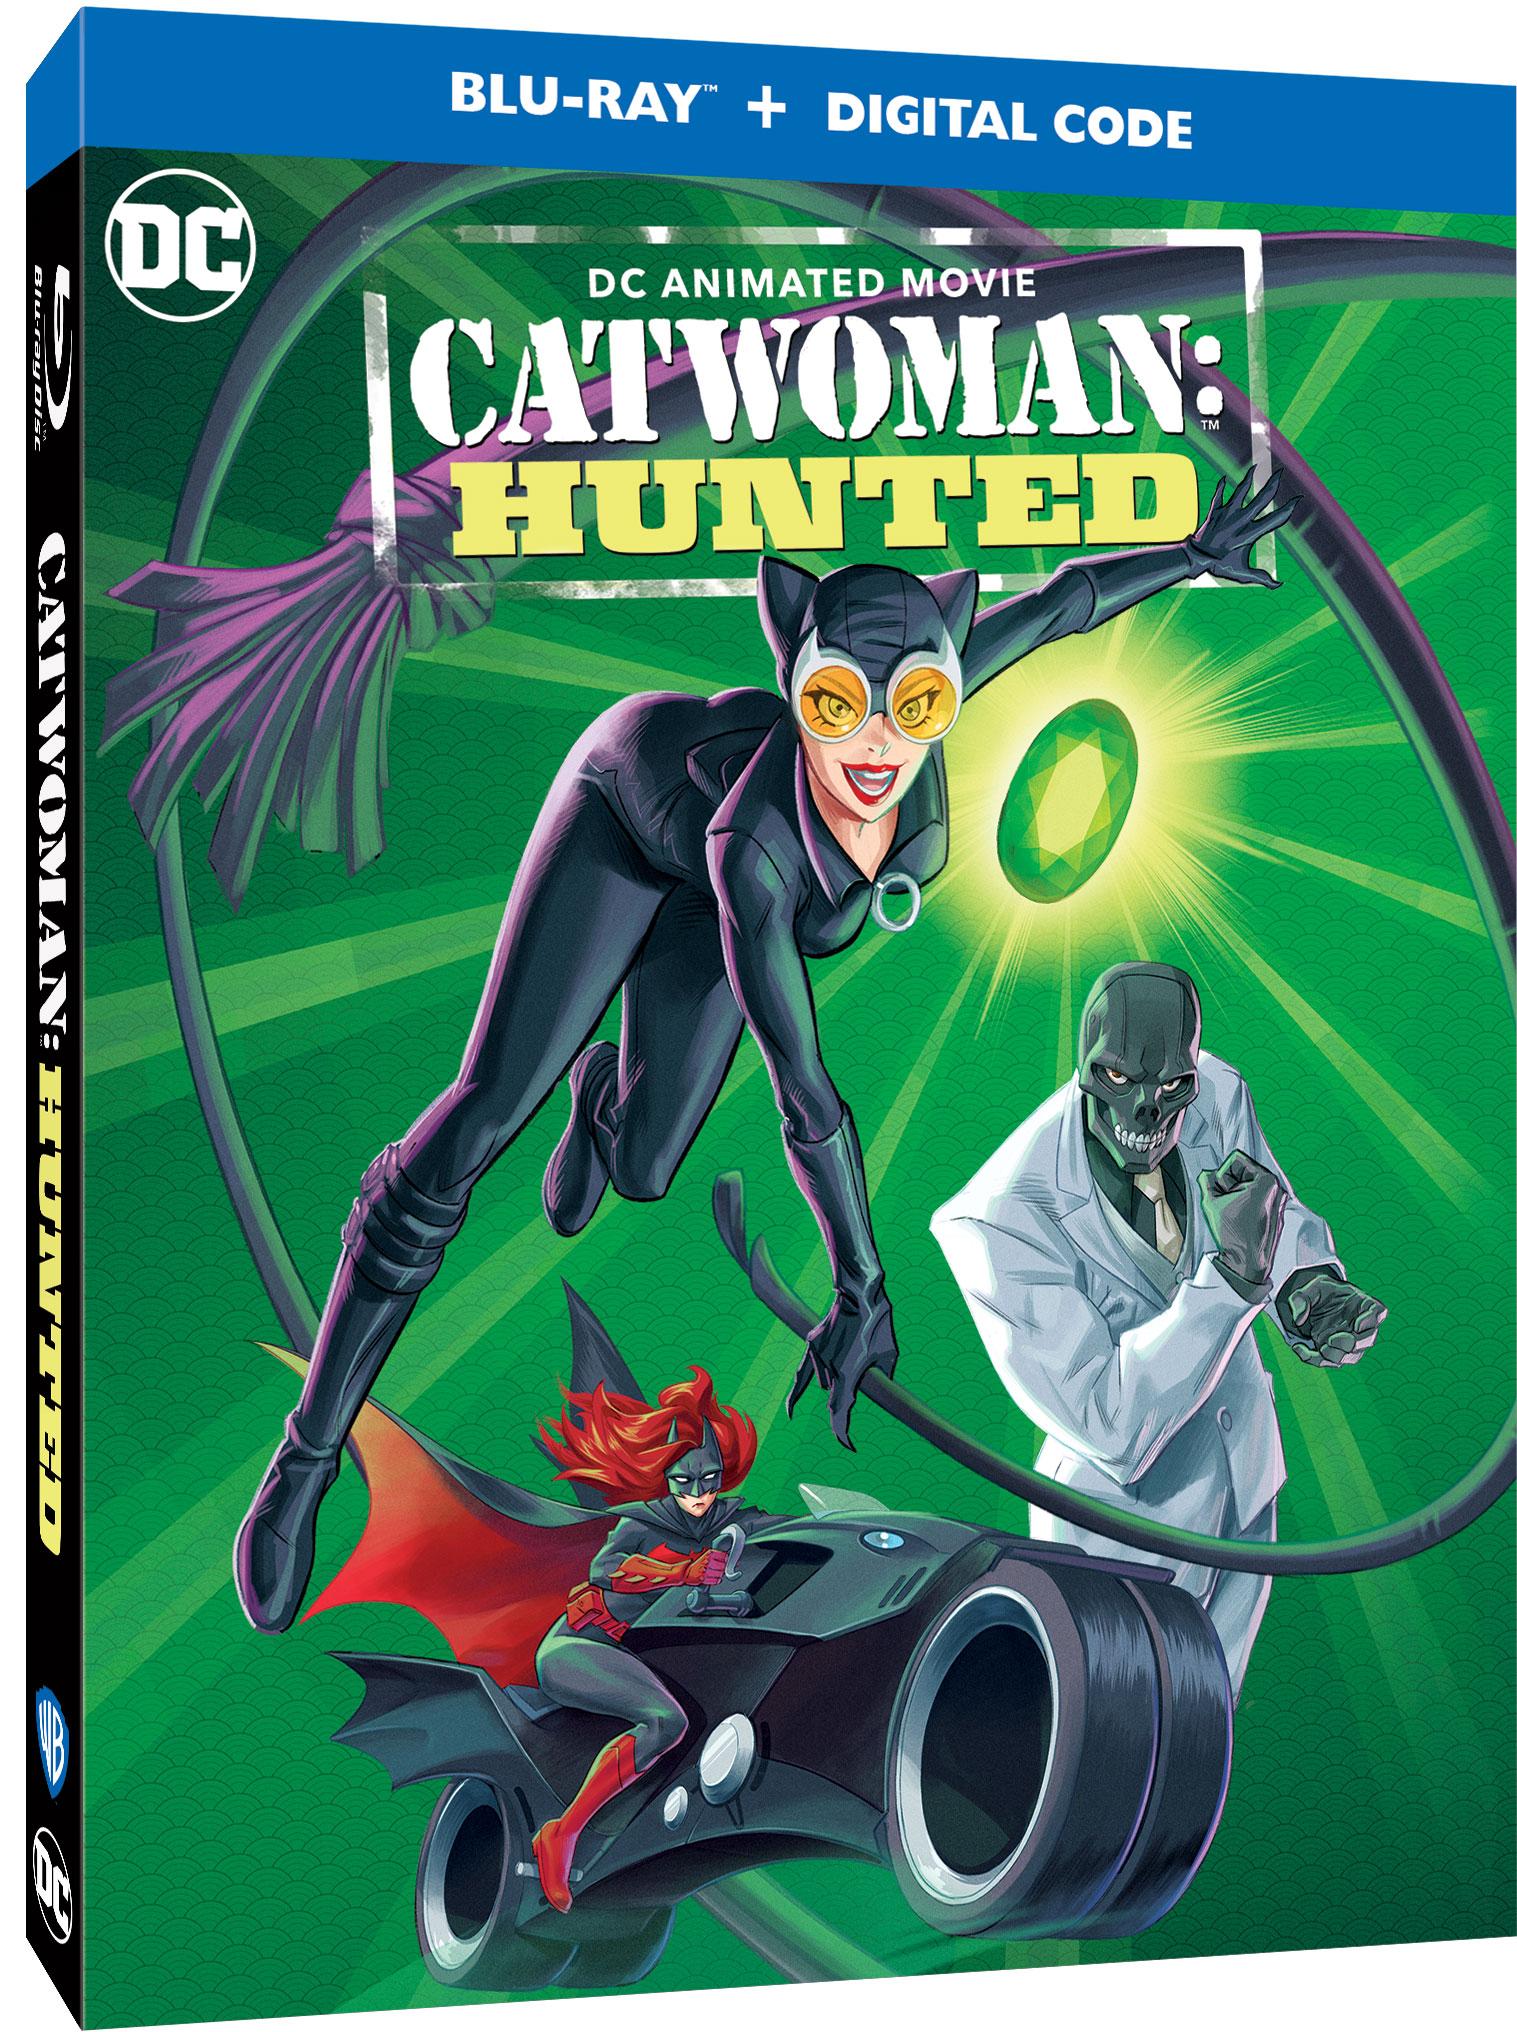 Catwoman: Hunted Blu-ray cover